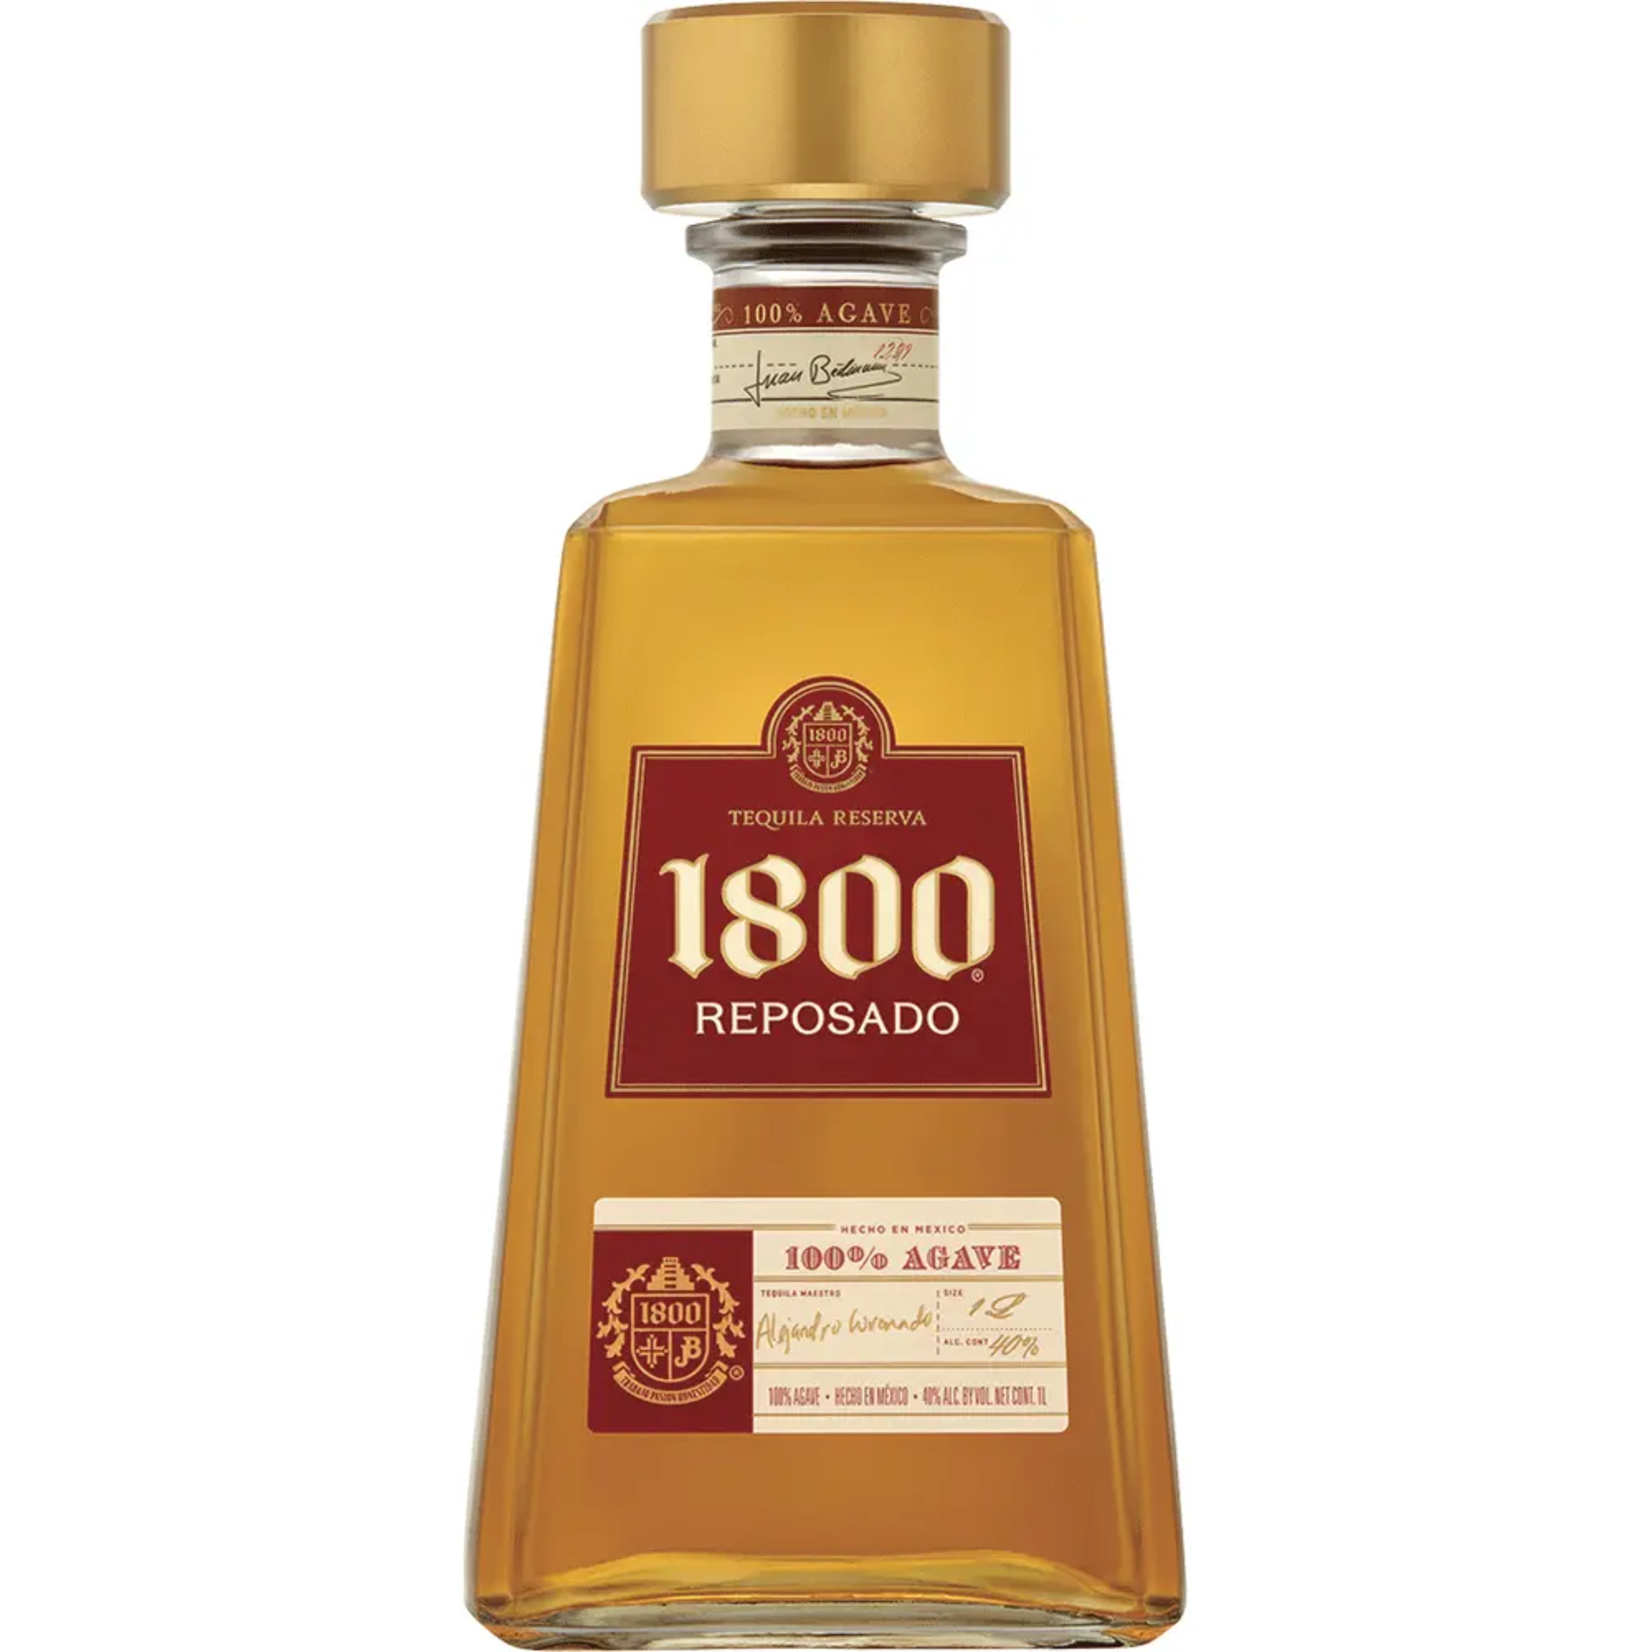 1800 Tequila 1800 Reposado Tequila 80Proof 1 Ltr